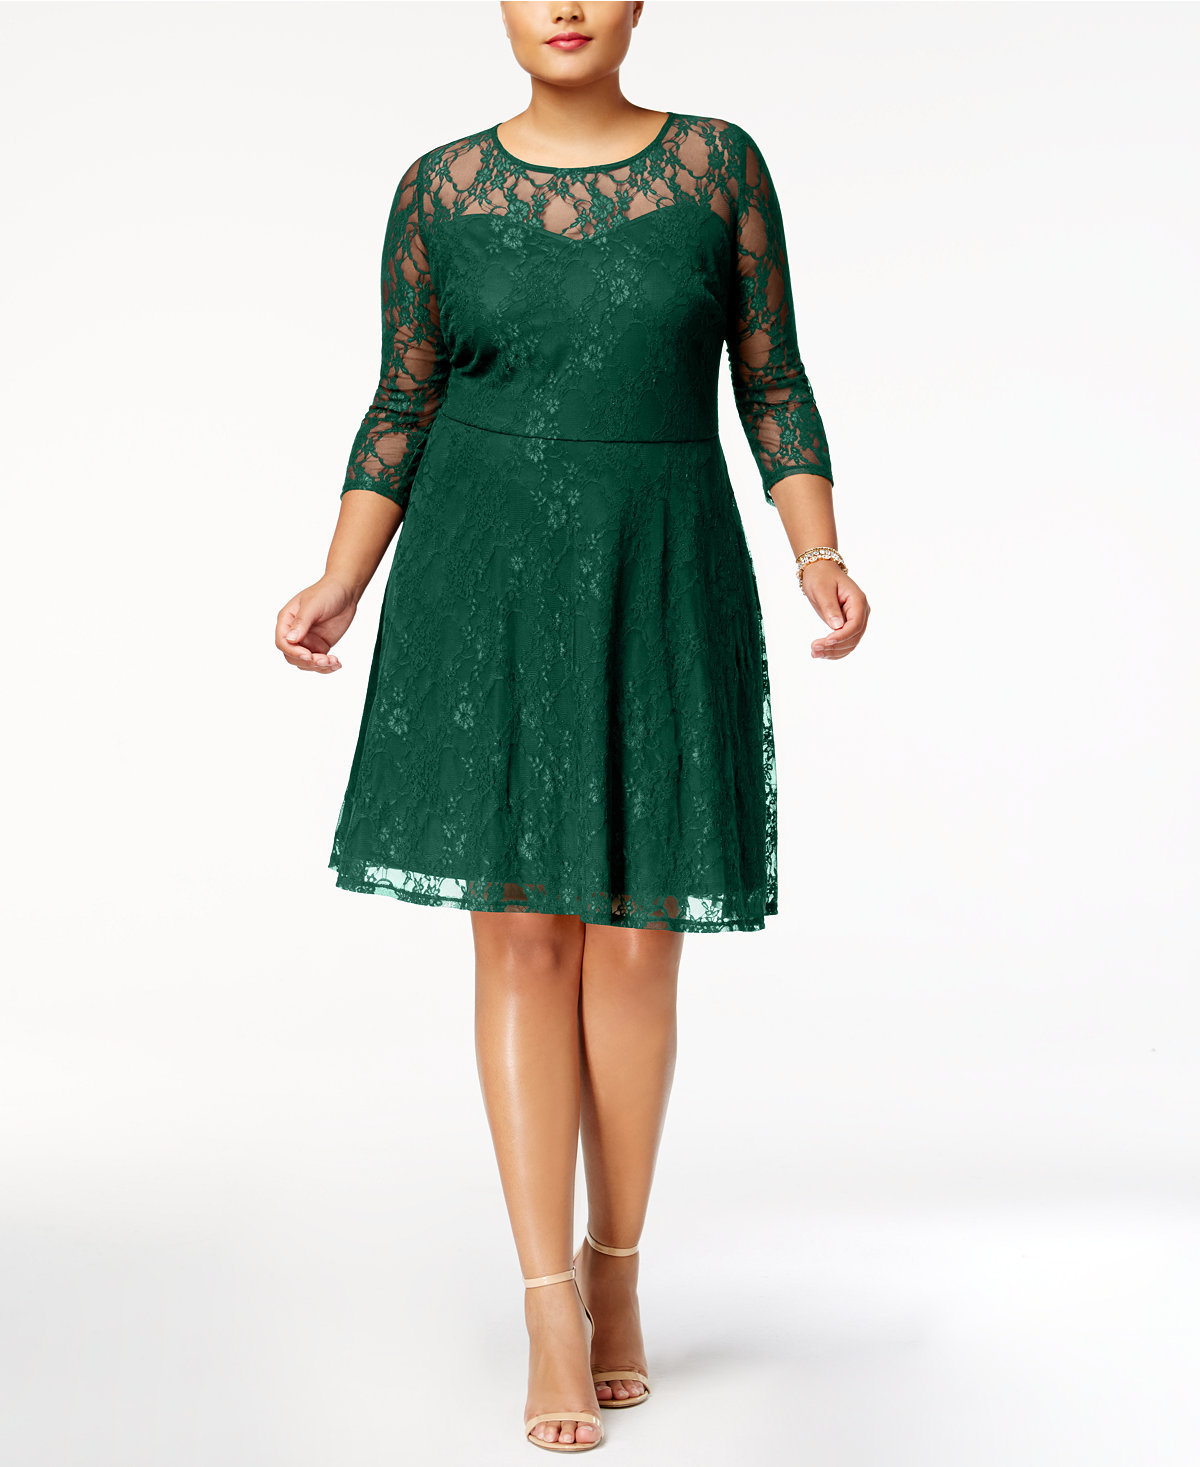 https://www.macys.com/shop/product/love-squared-trendy-plus-size-illusion-lace-fit-flare-dress?ID=5130108&CategoryID=37038#fn=sp%3D6%26spc%3D1100%26ruleId%3D87%7CBOOST%20SAVED%20SET%7CBOOST%20ATTRIBUTE%26searchPass%3DmatchNone%26slotId%3D2